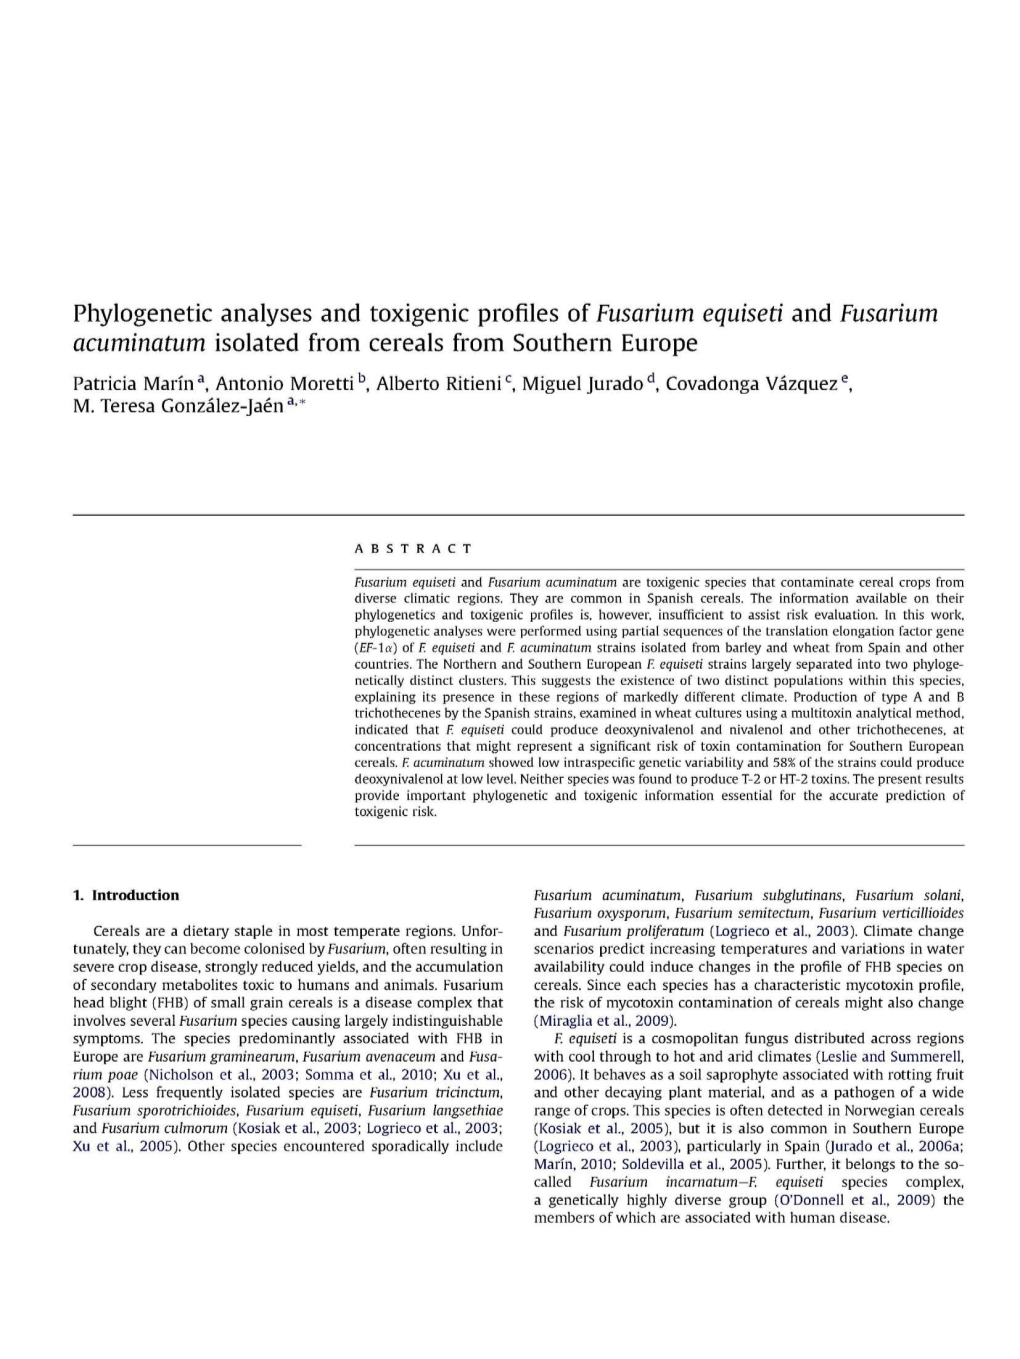 Phylogenetic Analyses and Toxigenic Profiles of Fusarium Equiseti and Fusarium Acuminatum Isolated from Cereals from Southern Eu